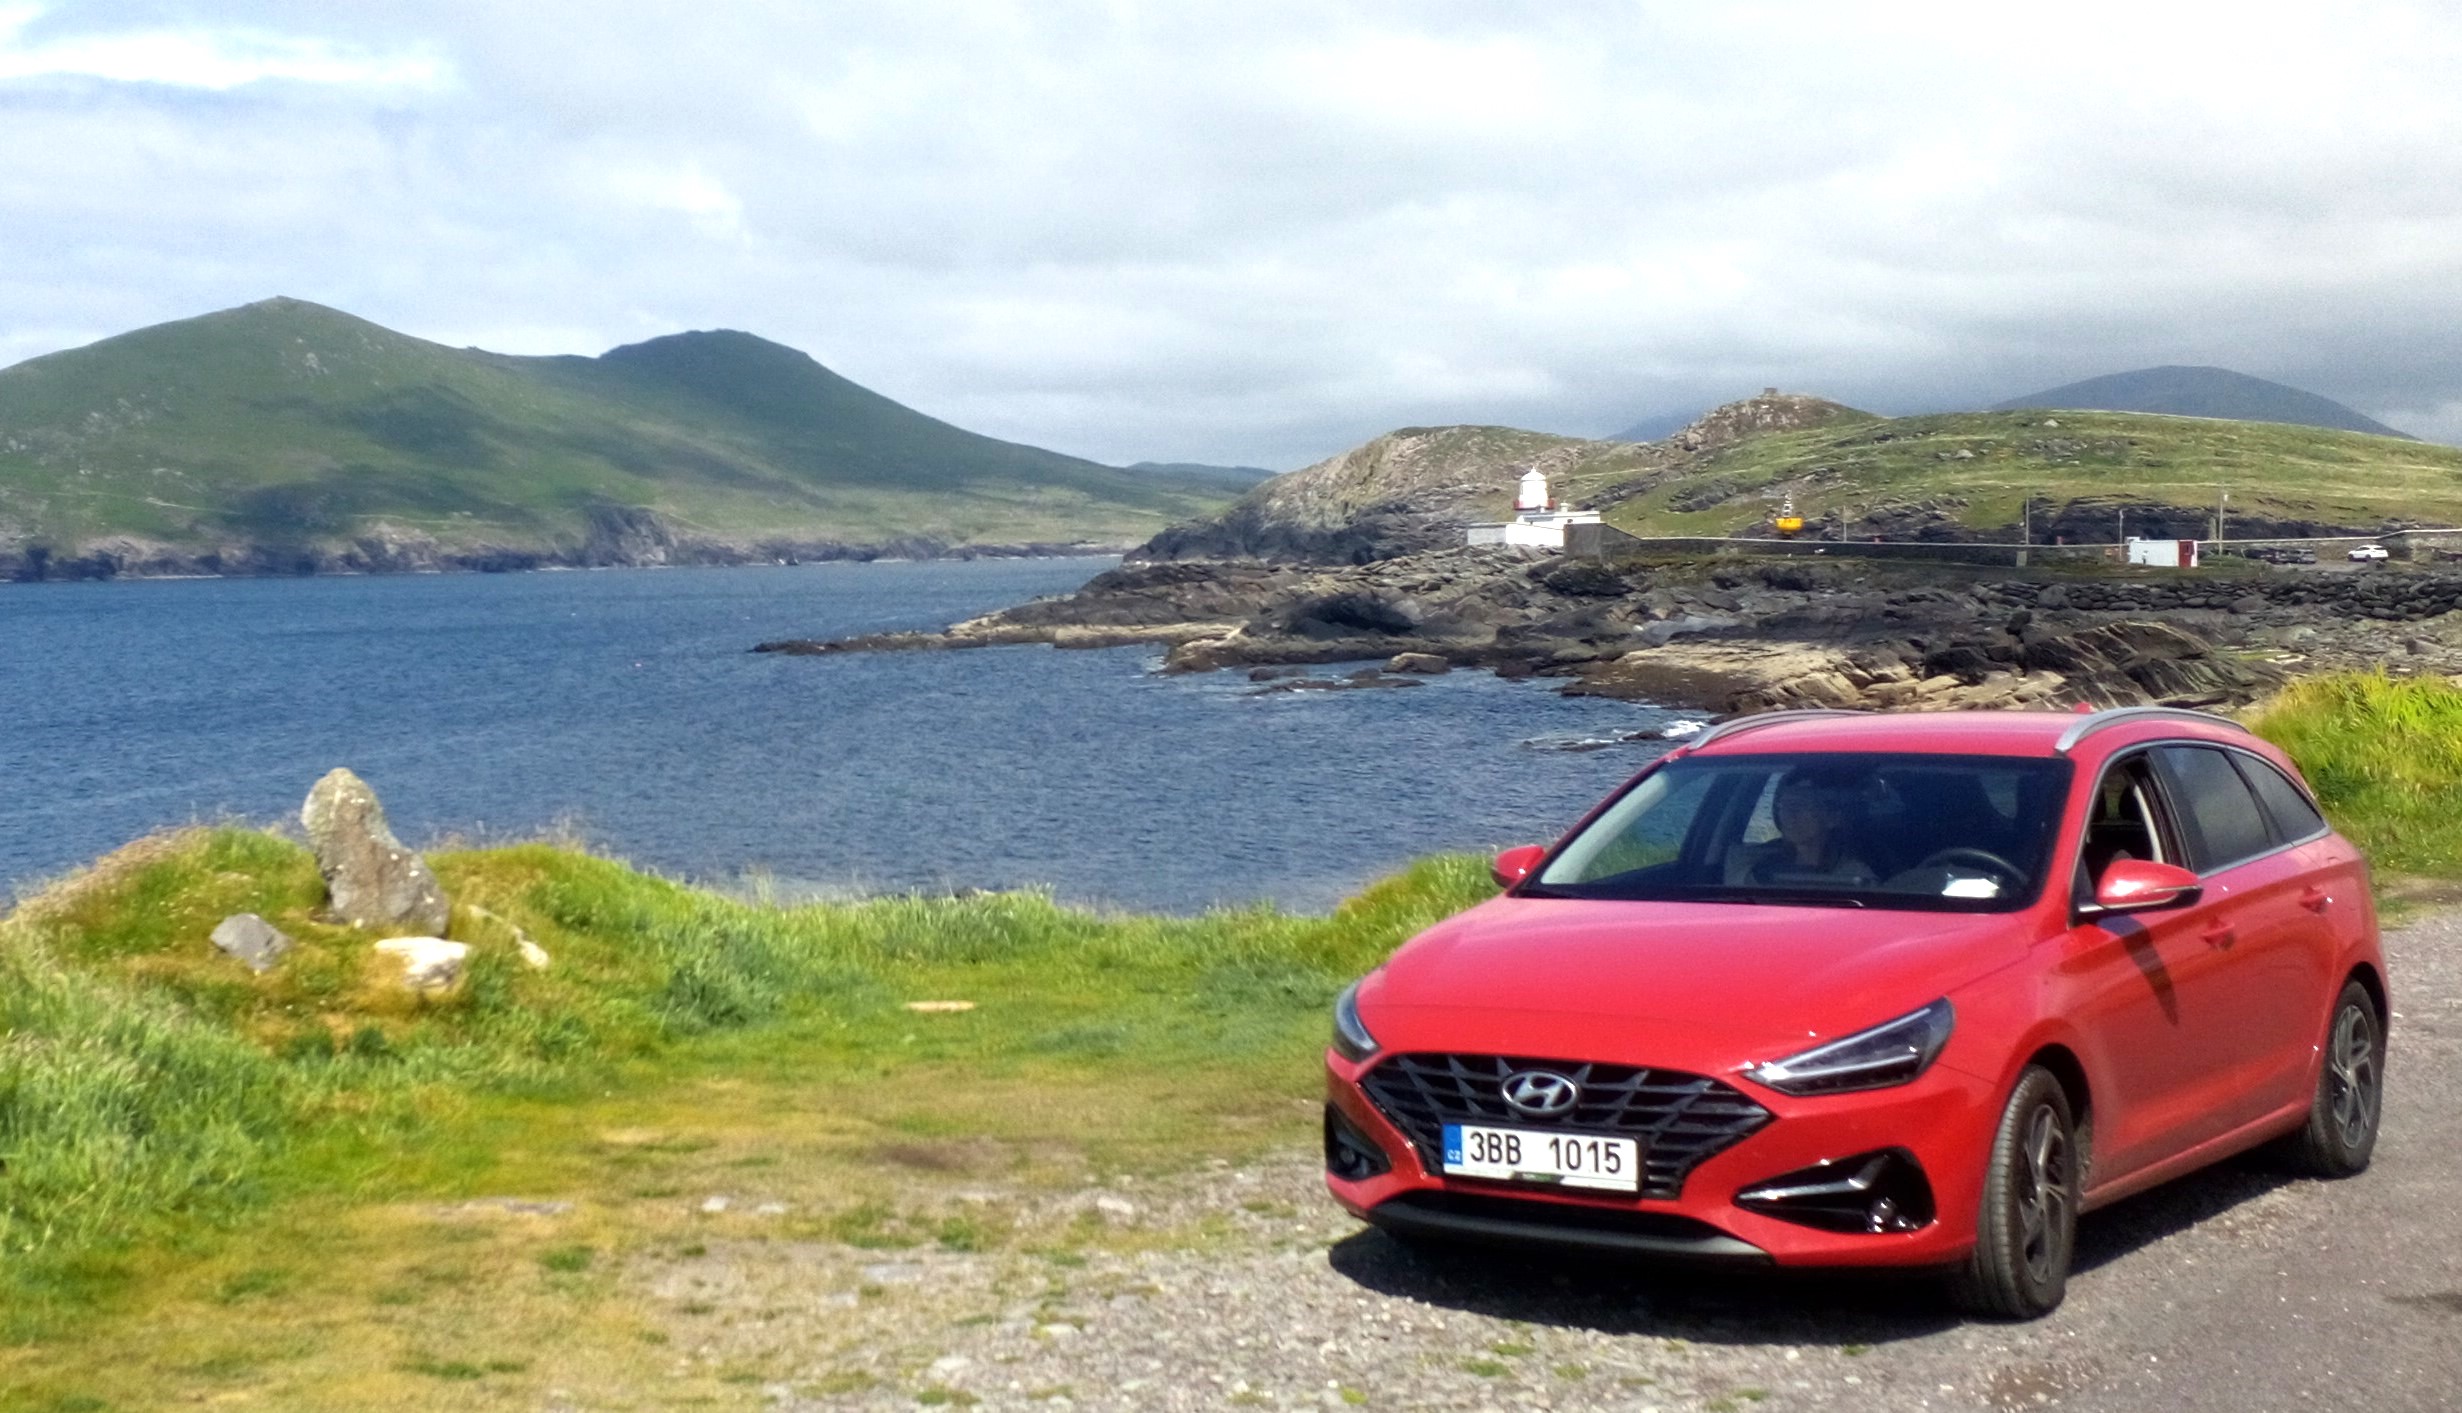 Renting a car abroad, go to Ireland or where you want